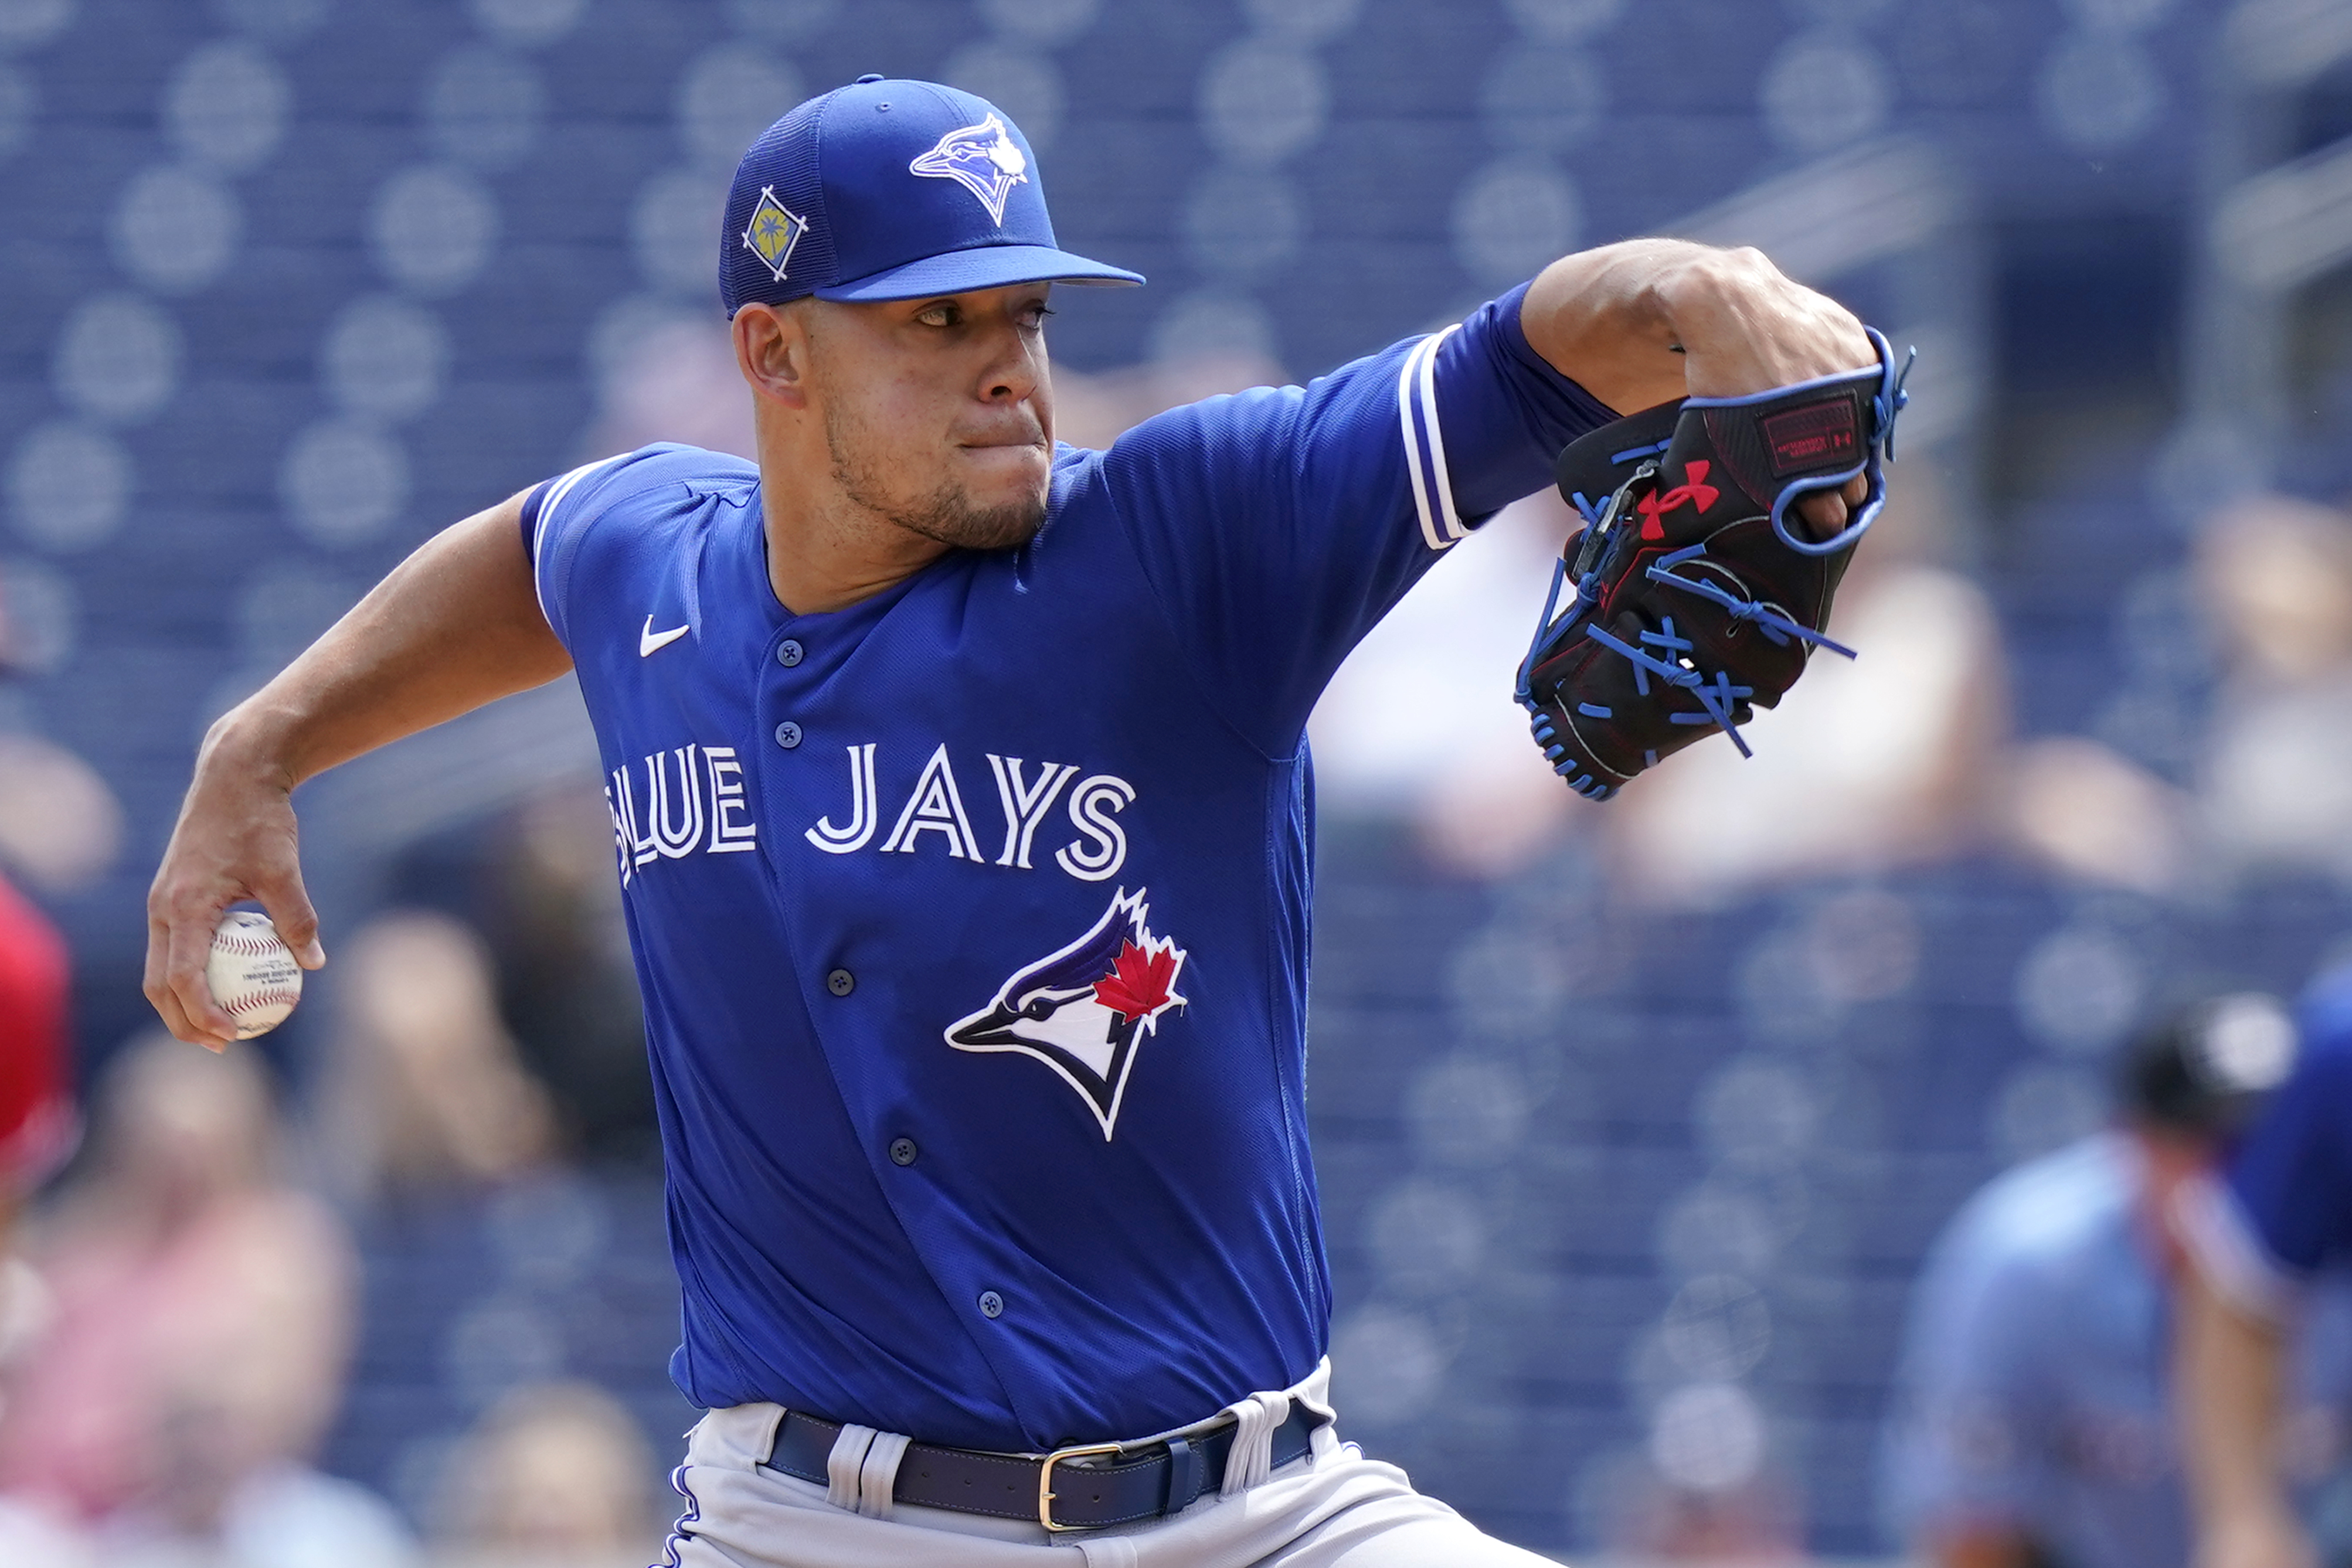 Right-hander Jose Berrios tabbed as the Toronto Blue Jays opening-day  starter - The Globe and Mail